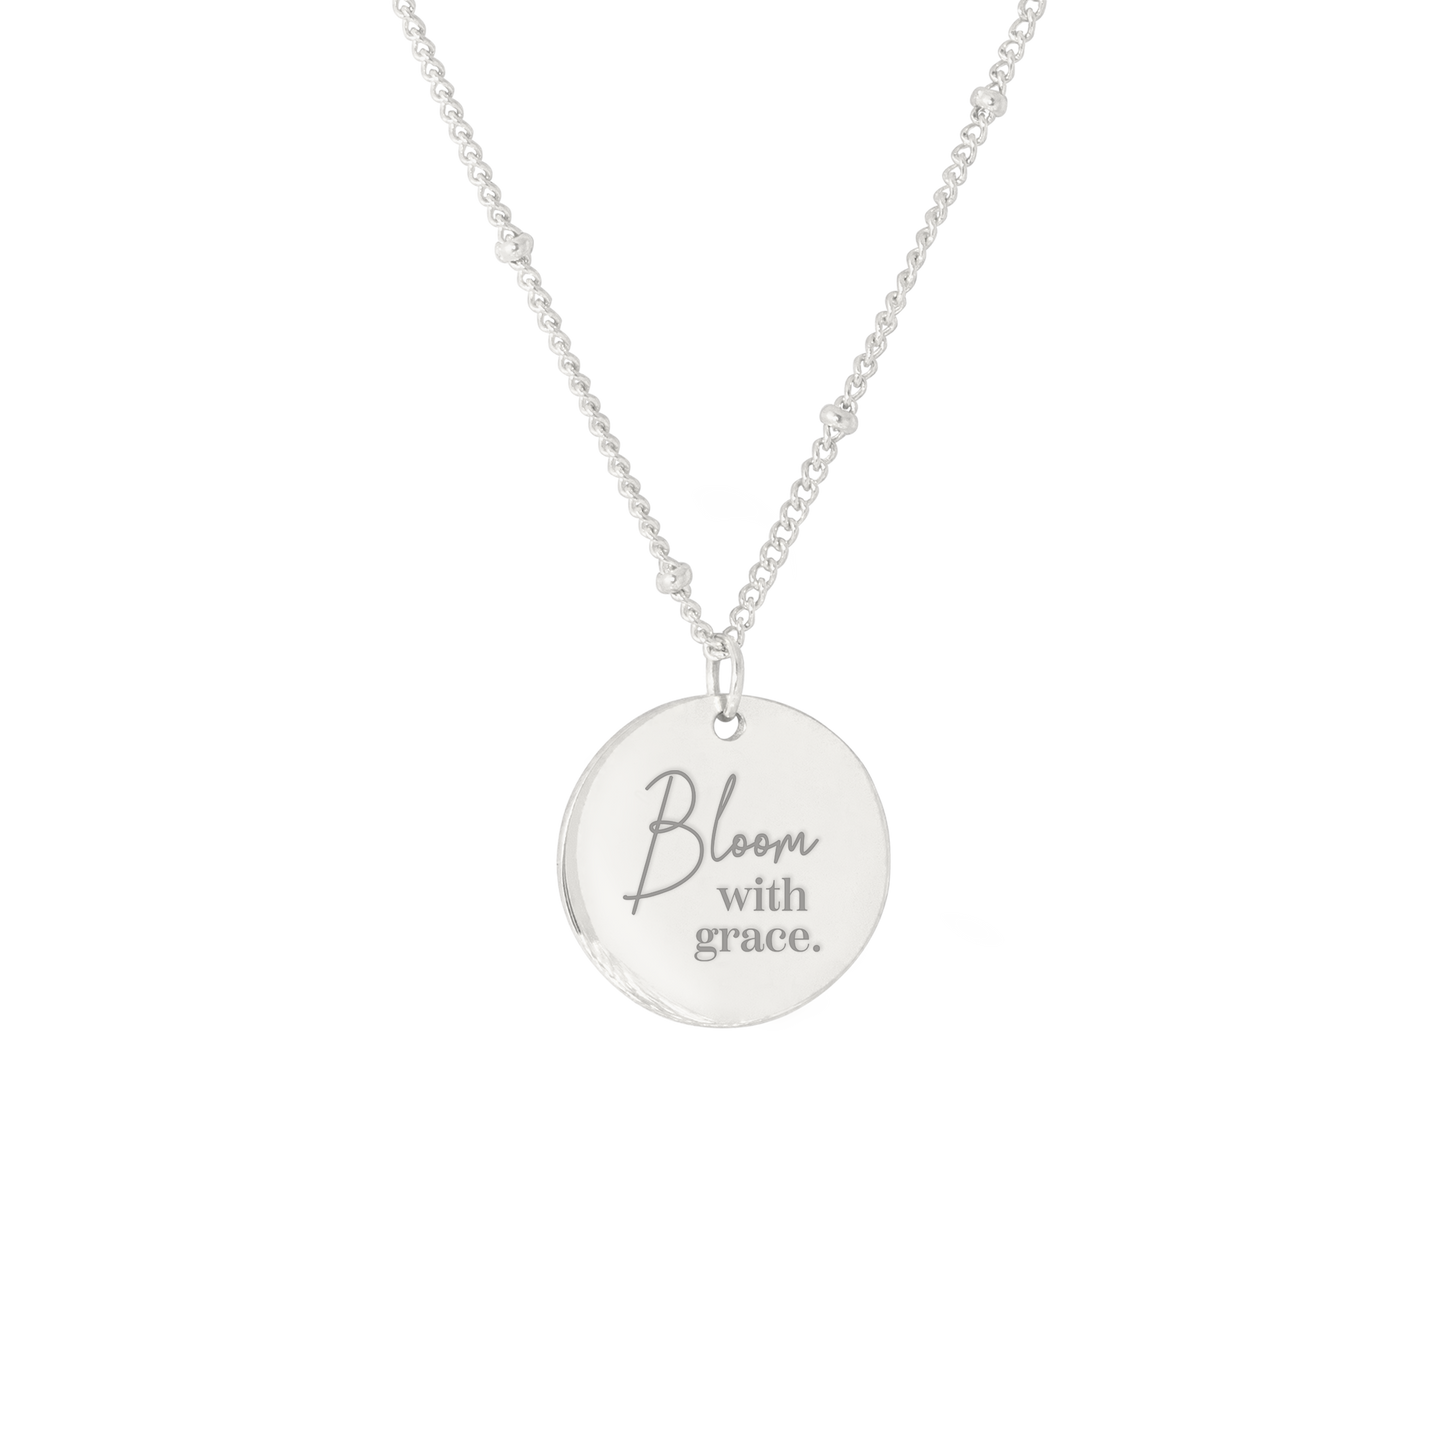 Bloom with grace Necklace Silver